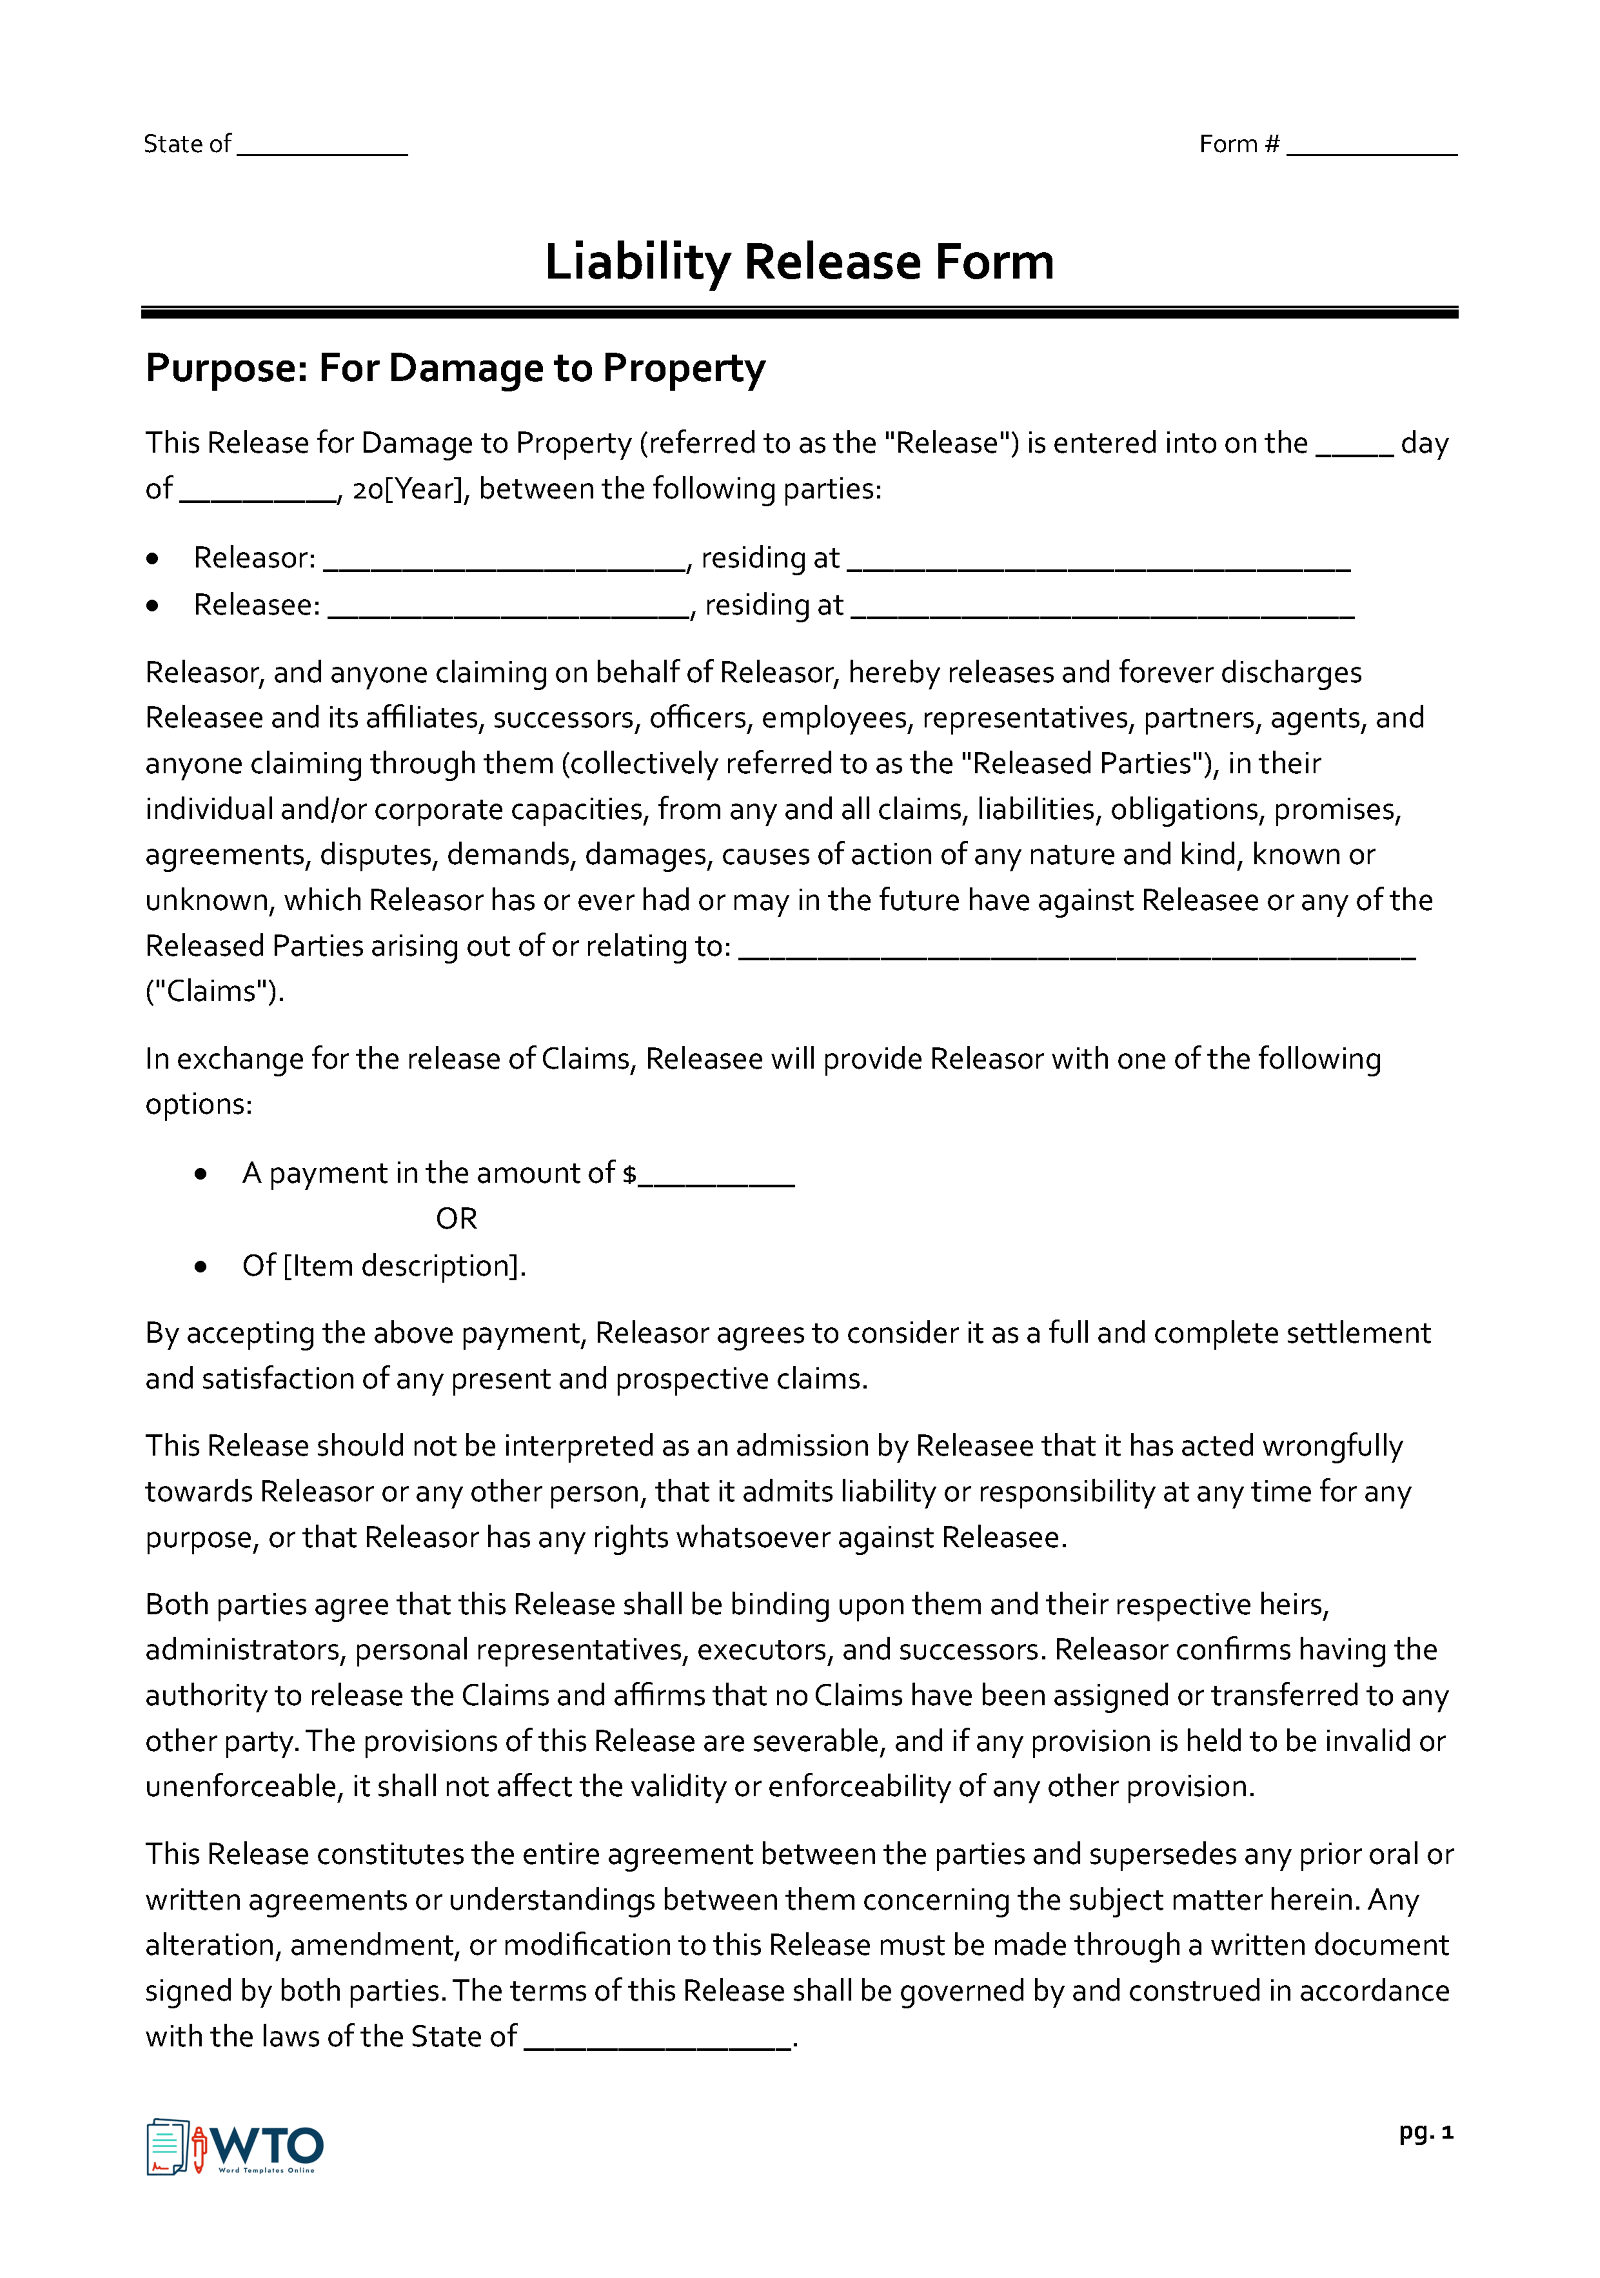 Free Downloadable Damage to Property Release of Liability Form for Word Document